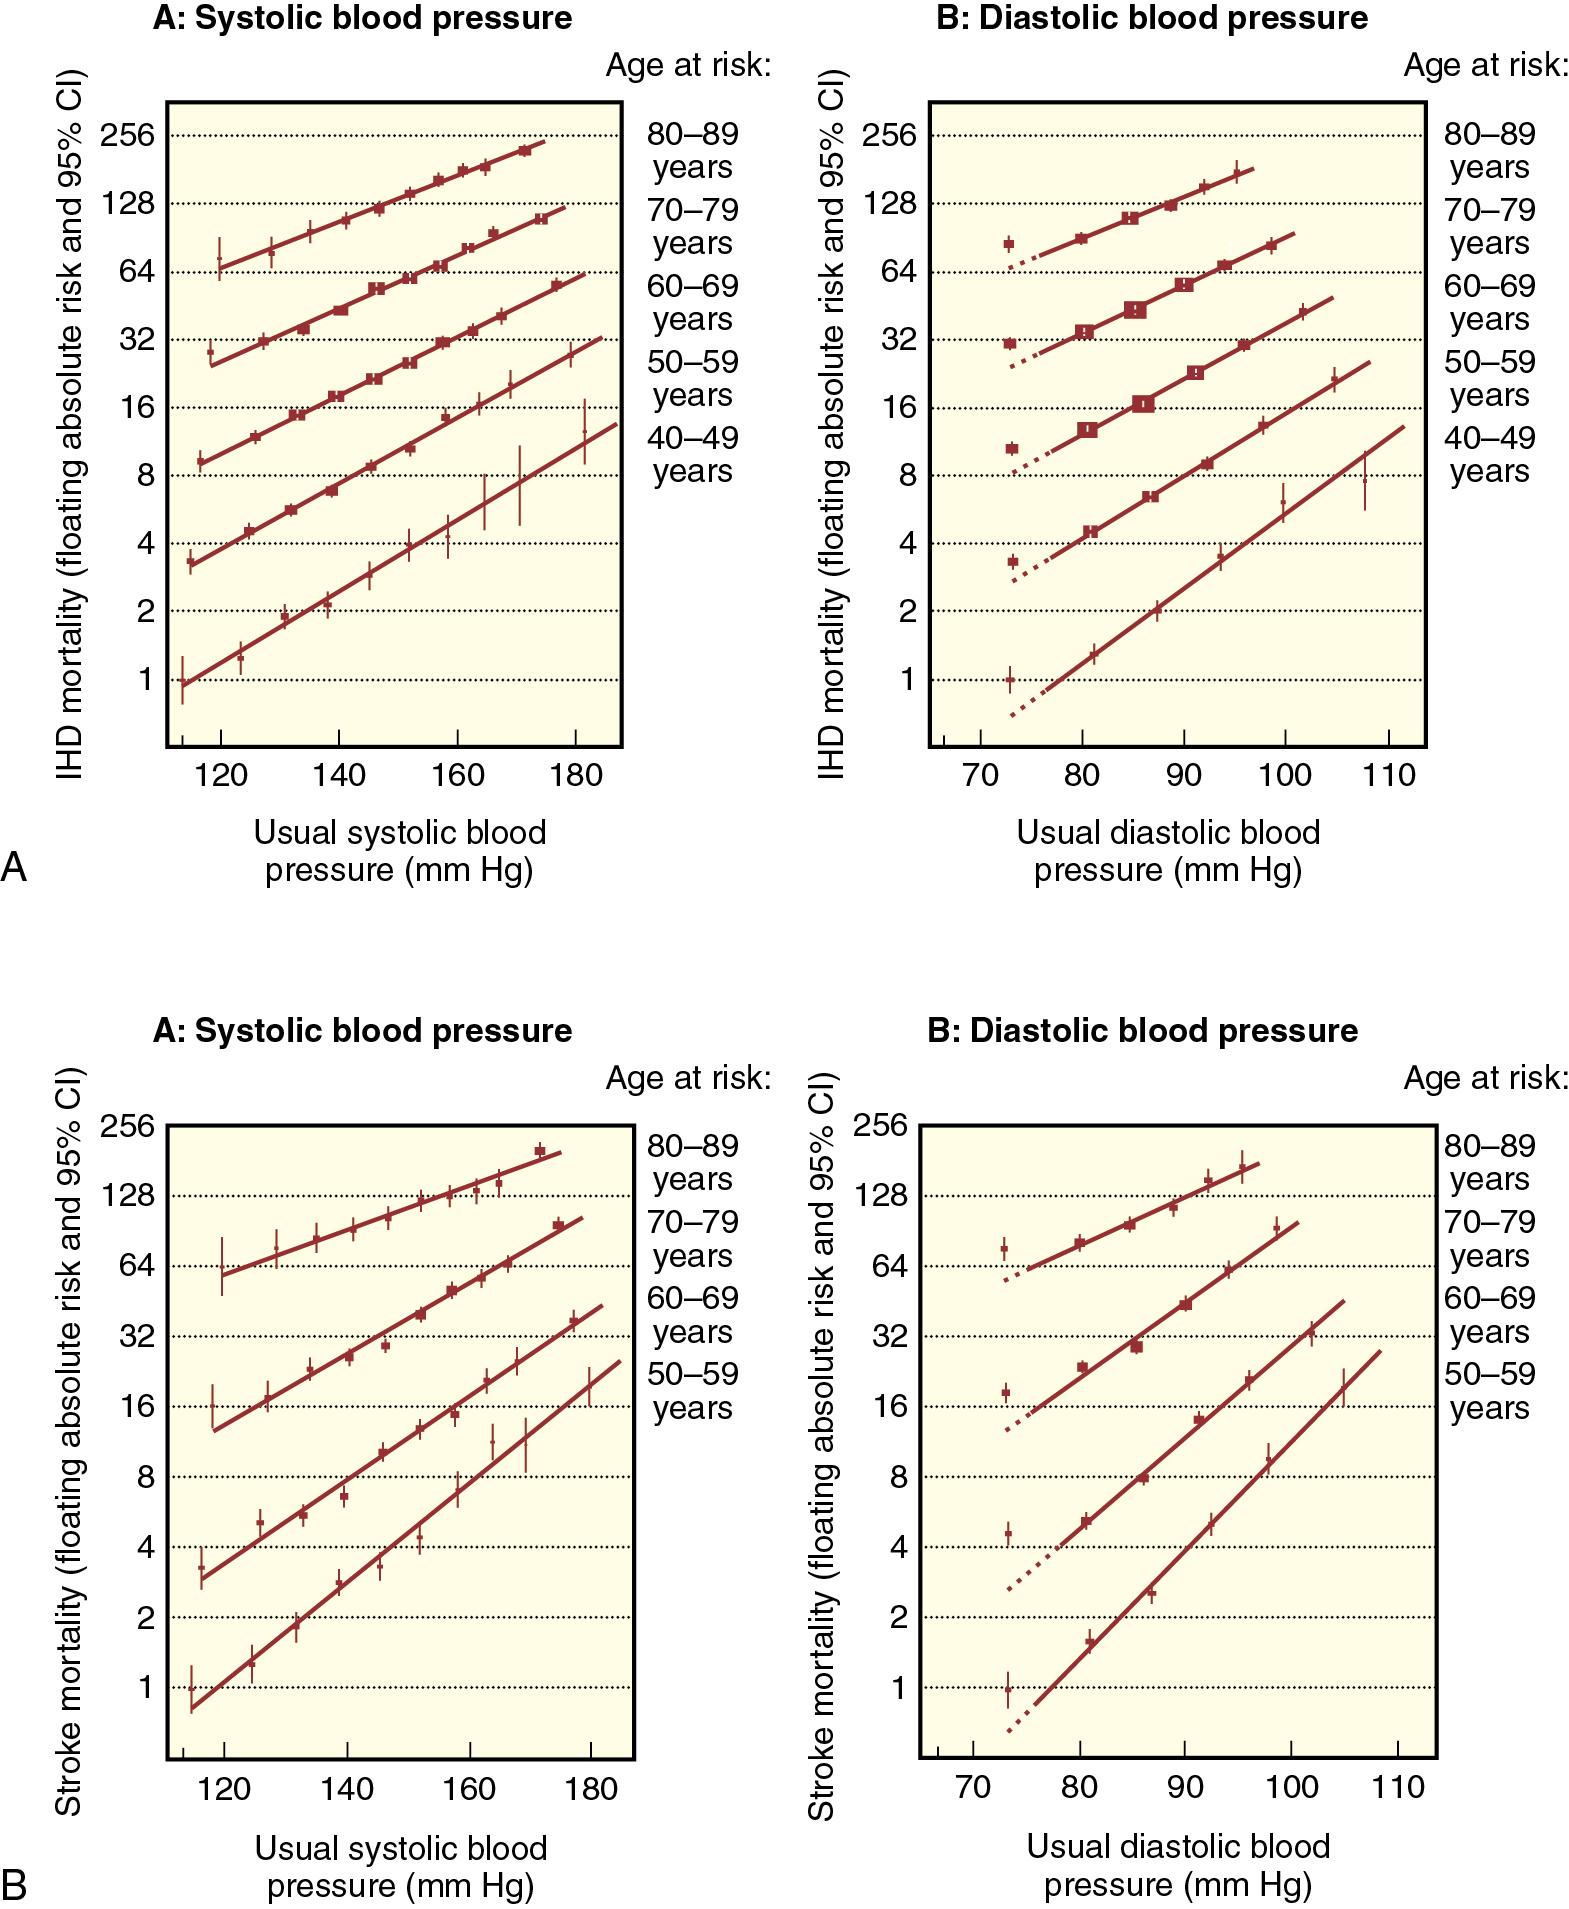 Fig. 9.1, Ischemic heart disease mortality (A) and stroke mortality (B) rates in each decade of age versus usual blood pressure at the start of that decade. Mortality rates are termed floating because multiplication by a constant appropriate for a particular population would allow prediction of the absolute rate in that population. CI, Confidence interval; IHD, ischemic heart disease.